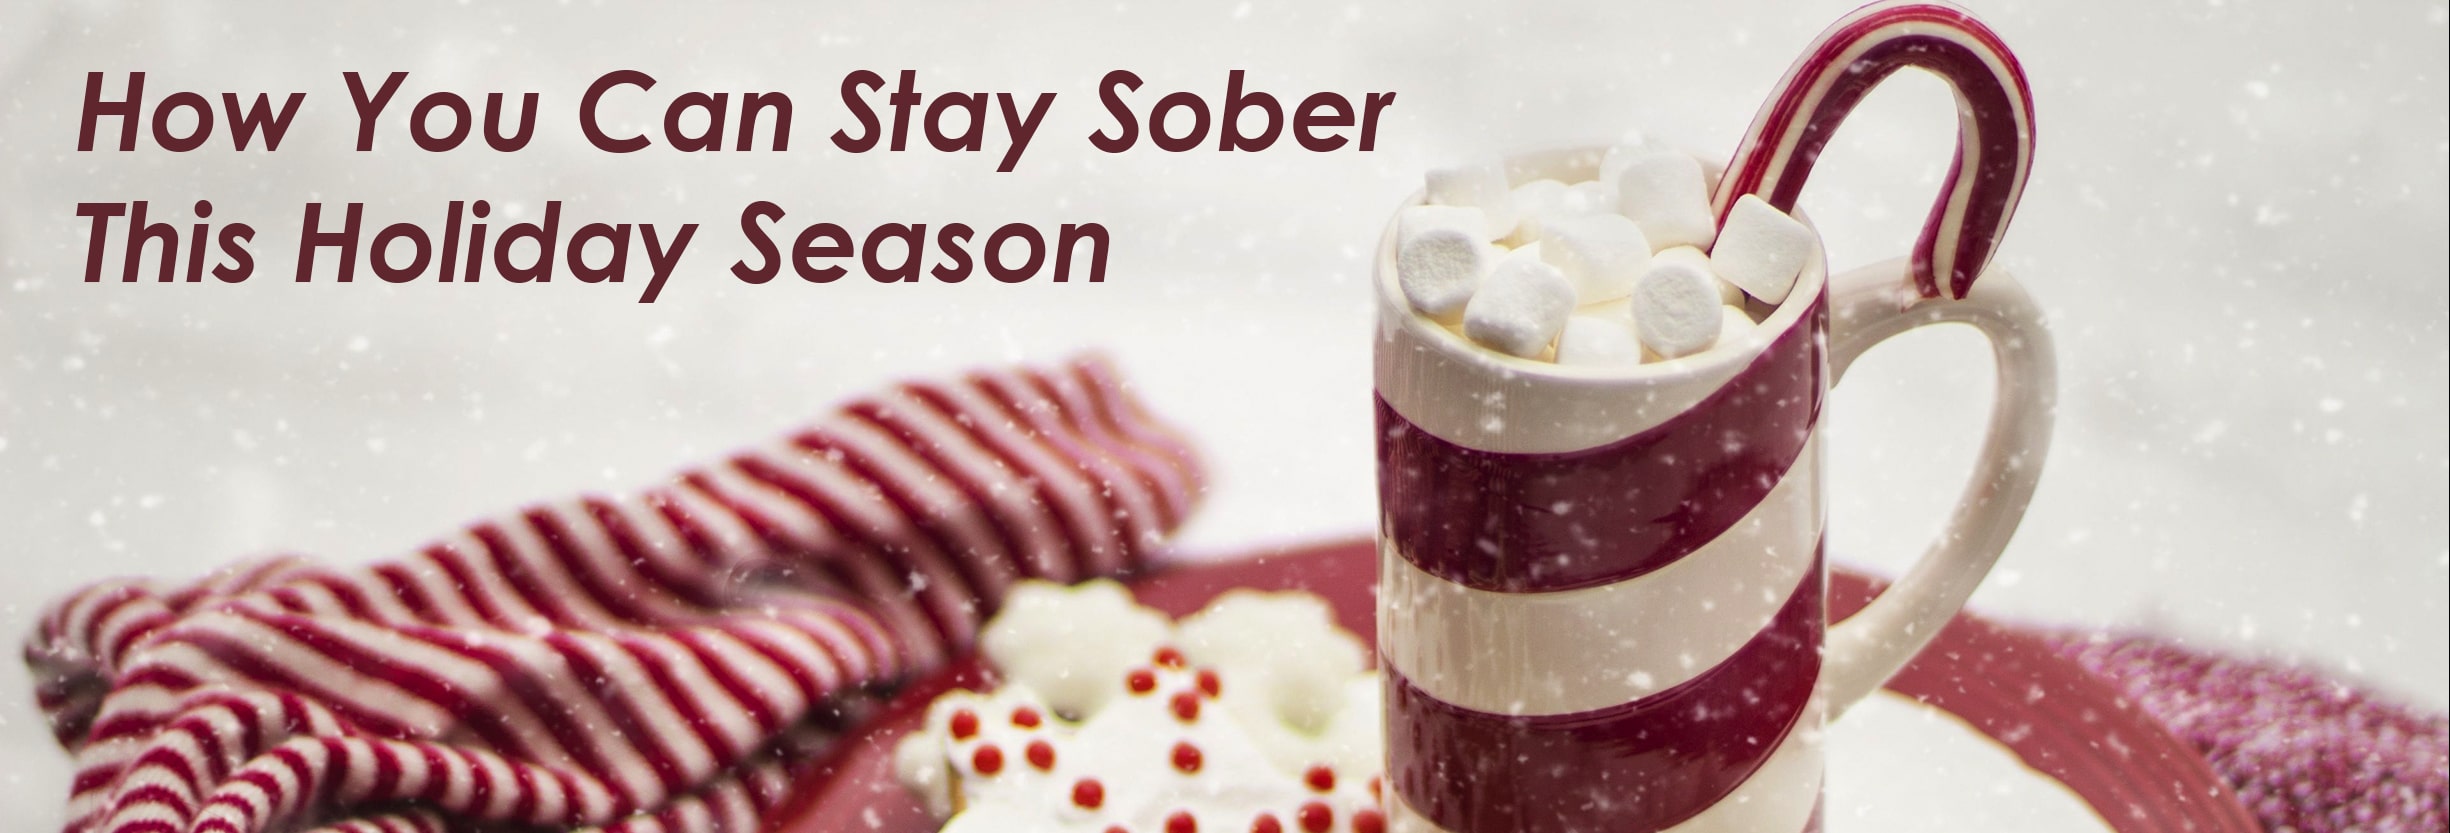 How You Can Stay Sober this Holiday season